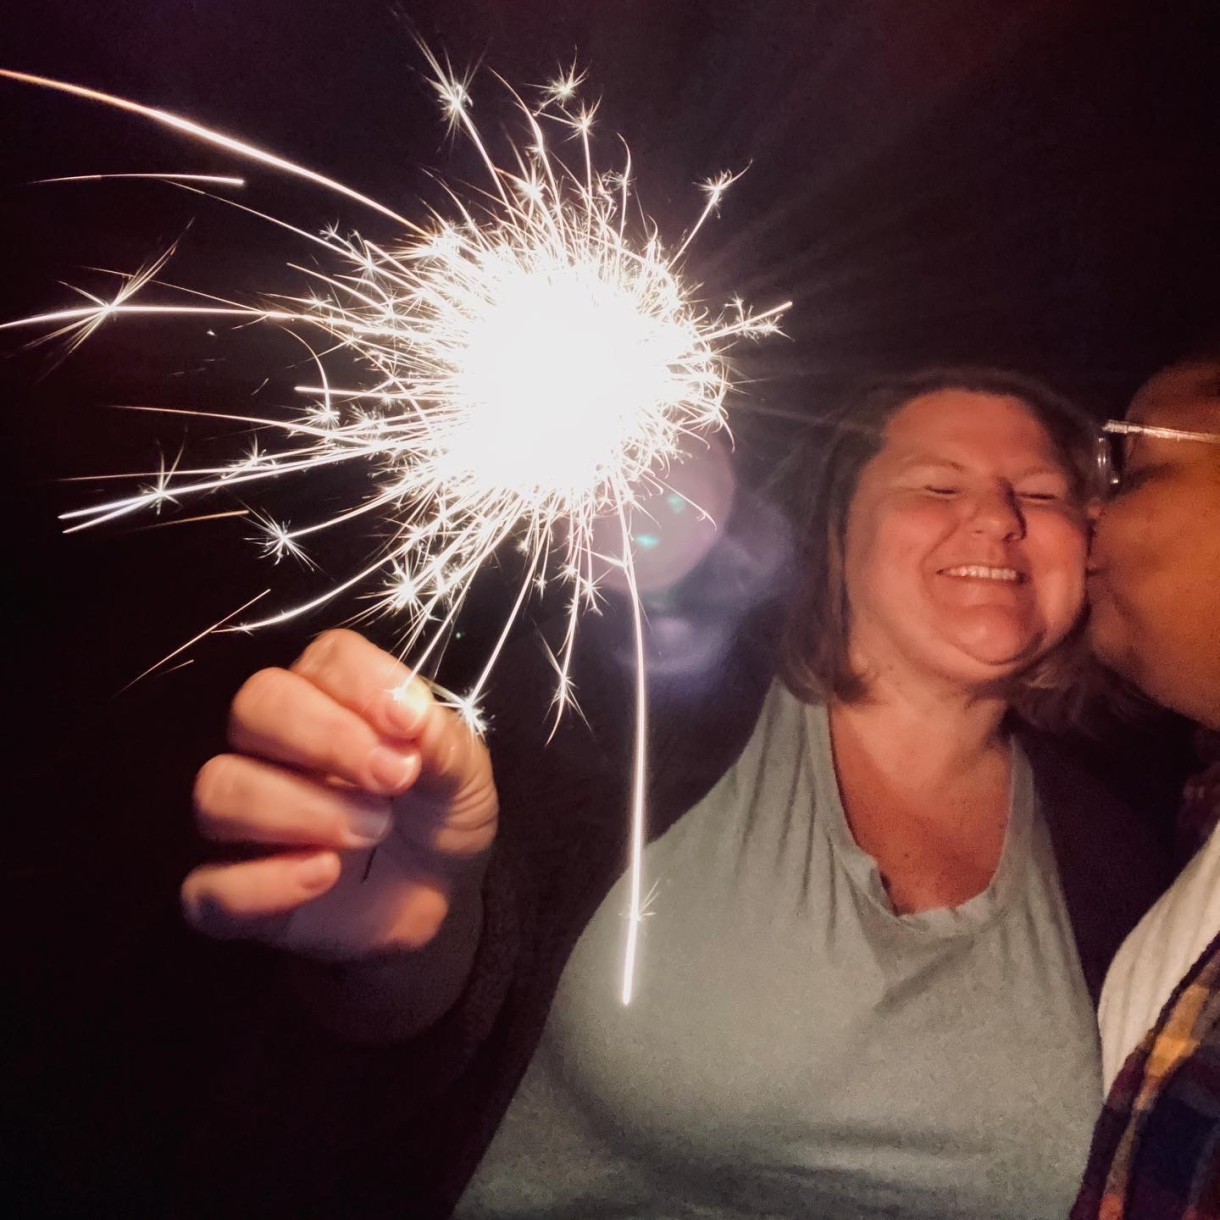 a photo with a central sparkler (like the fireworks kind). Jane is holding the sparkler toward the camera while shea kisses her on the cheek. the background is dark. it is night. they are both smiling.